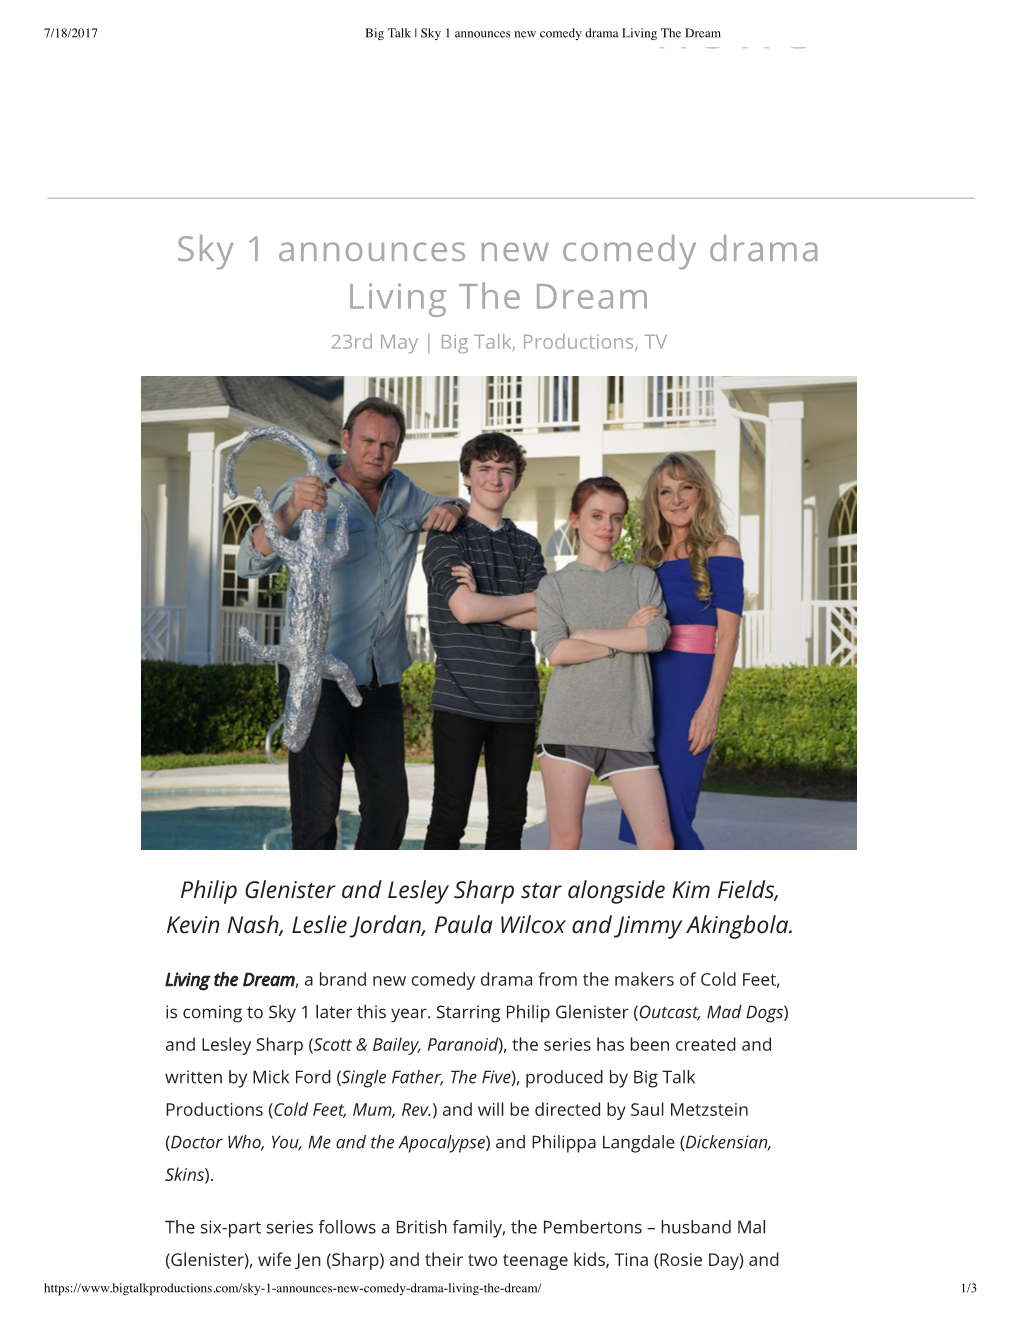 Sky 1 Announces New Comedy Drama Living the Dream 23Rd May | Big Talk, Productions, TV